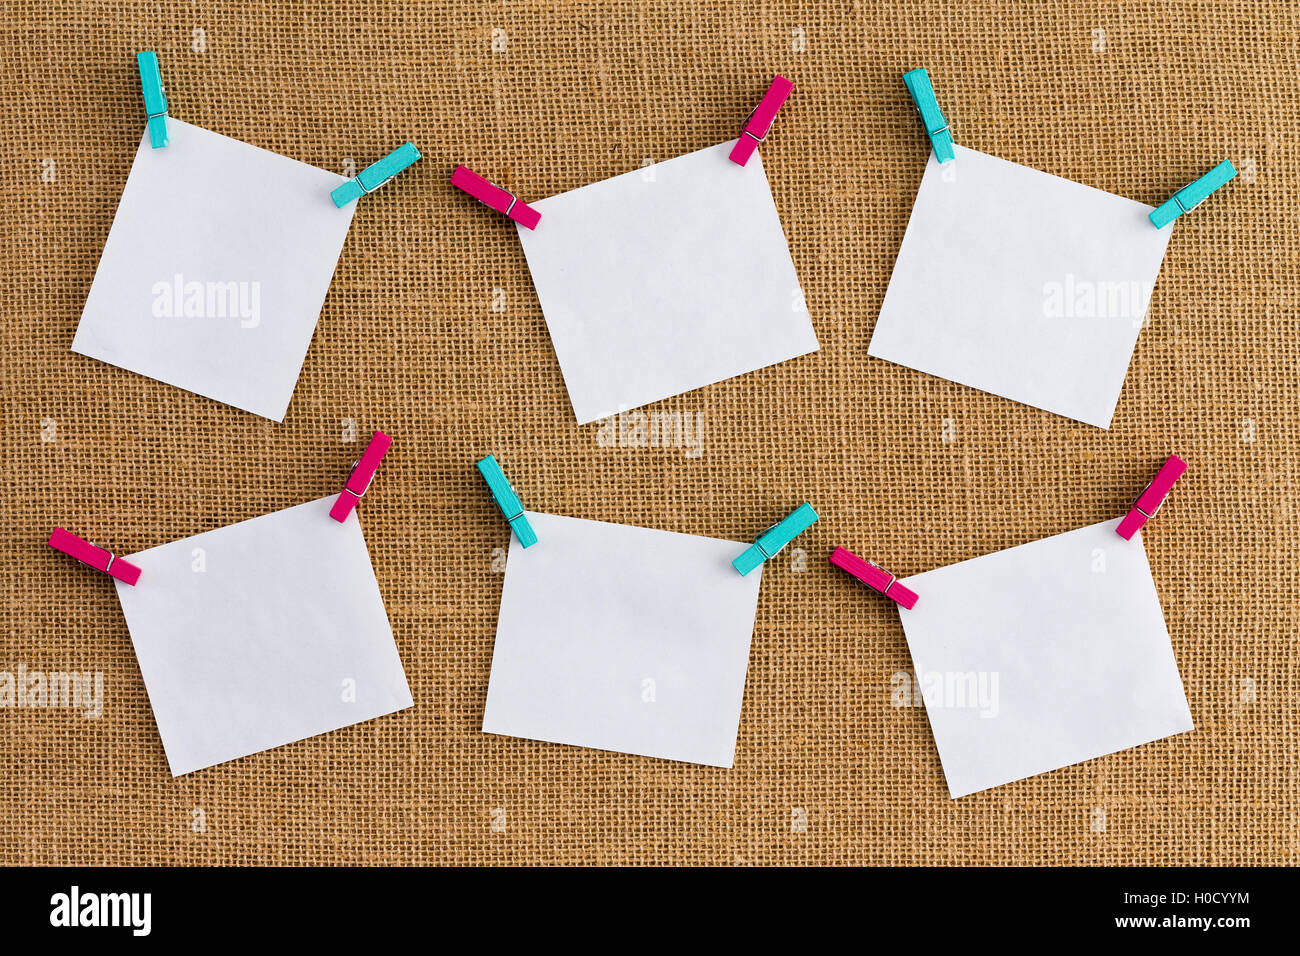 Six misaligned blank white notepads on hessian or burlap fabric hanging from alternating colorful pink and blue clothespins in a Stock Photo